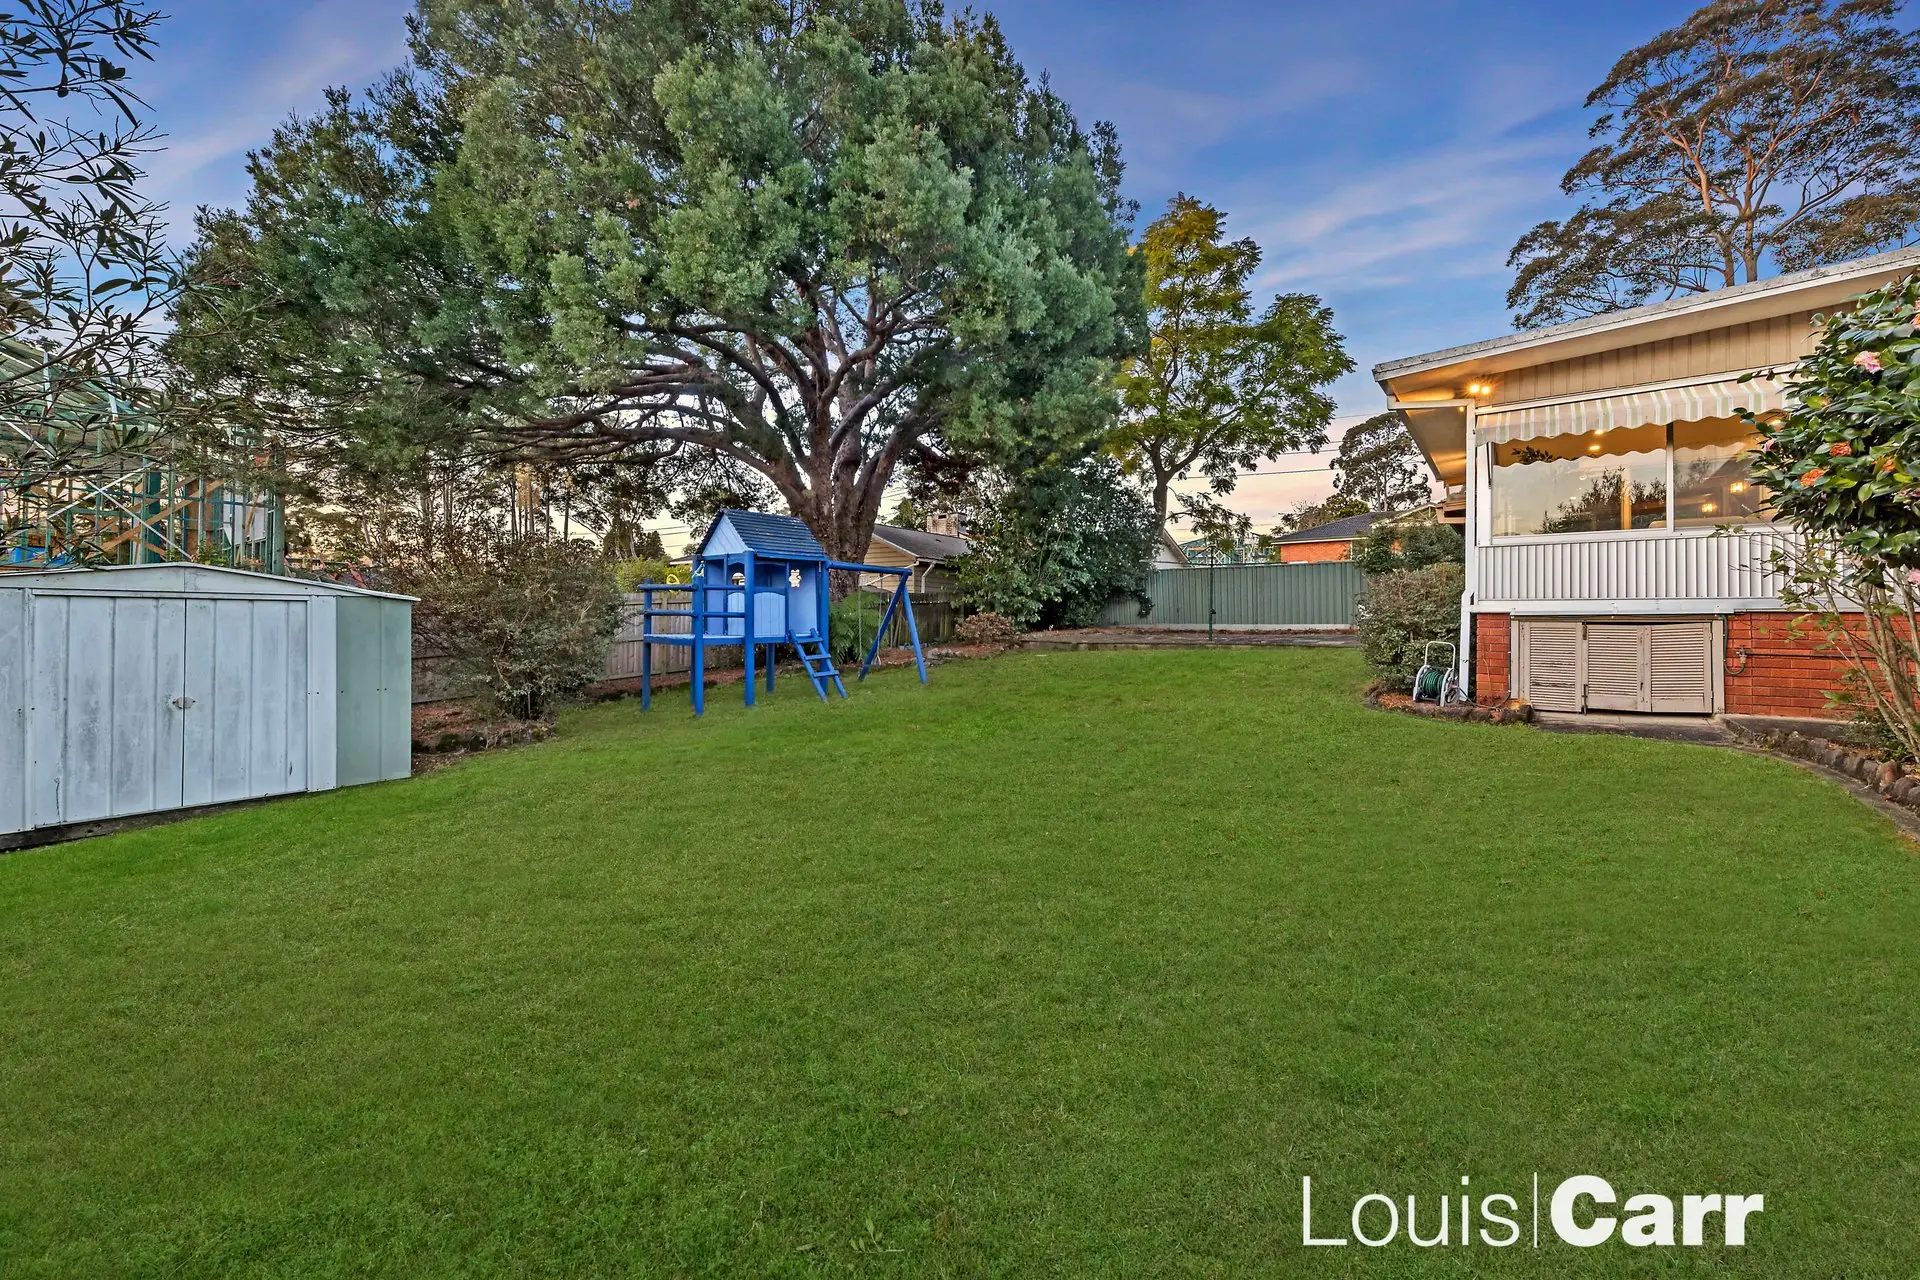 Photo #16: 4 Valda Street, West Pennant Hills - Sold by Louis Carr Real Estate